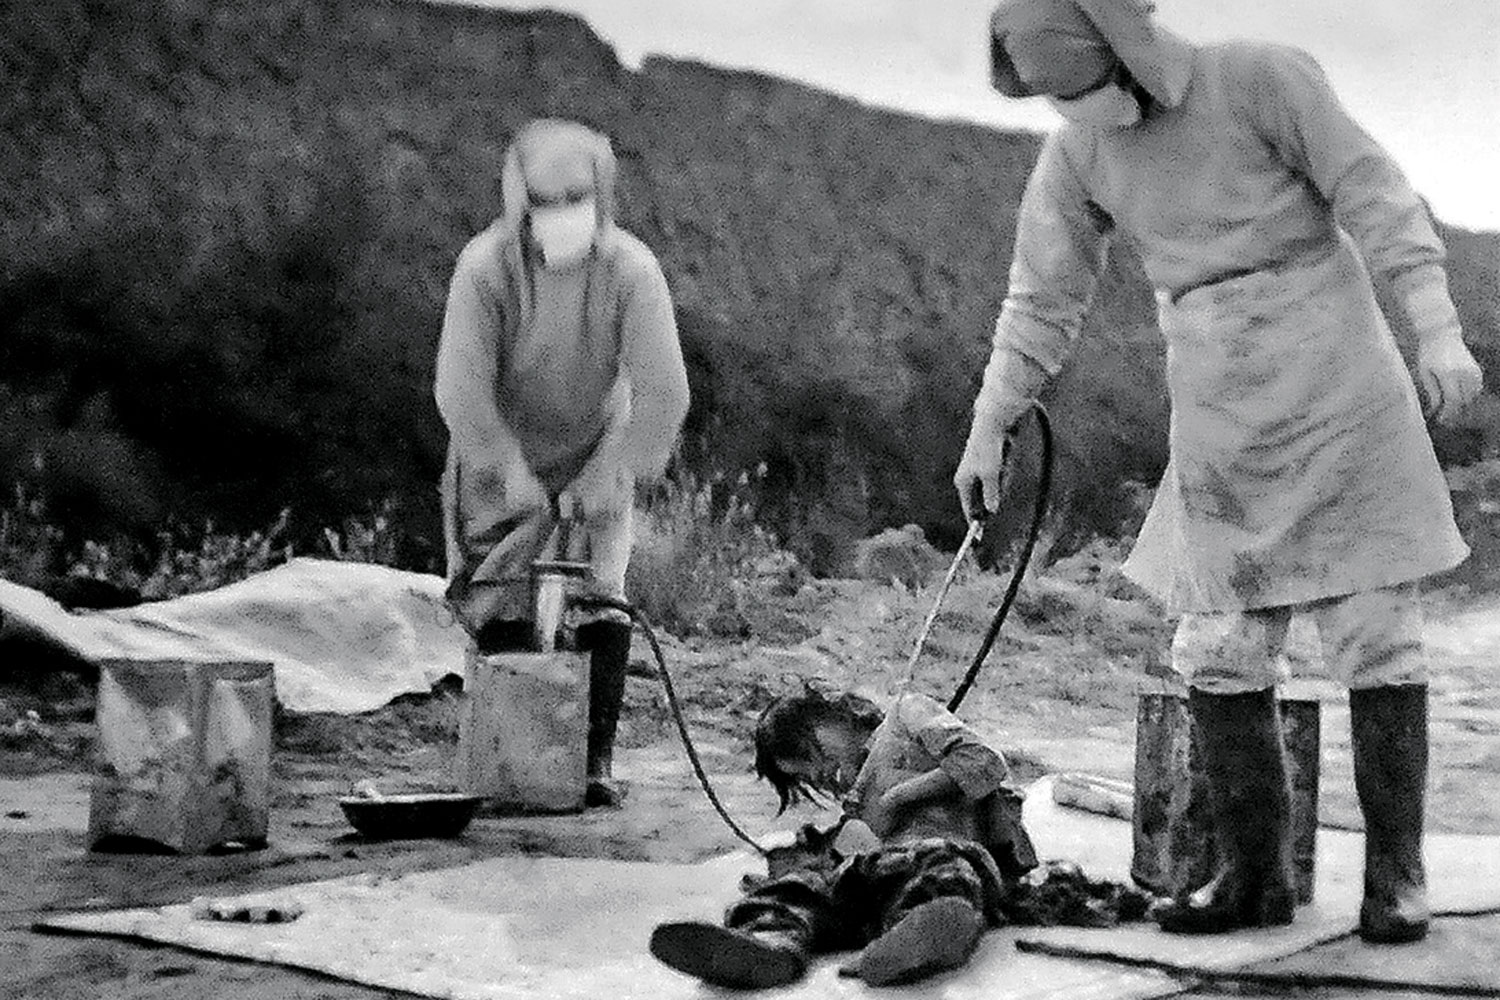 Between 200,000 and 300,000 Chinese are estimated to have been killed by the Imperial Japanese Army for biological and chemical research at the notorious Unit 731 in Harbin including disease injections, vivisection, amputations, and organ procurement.